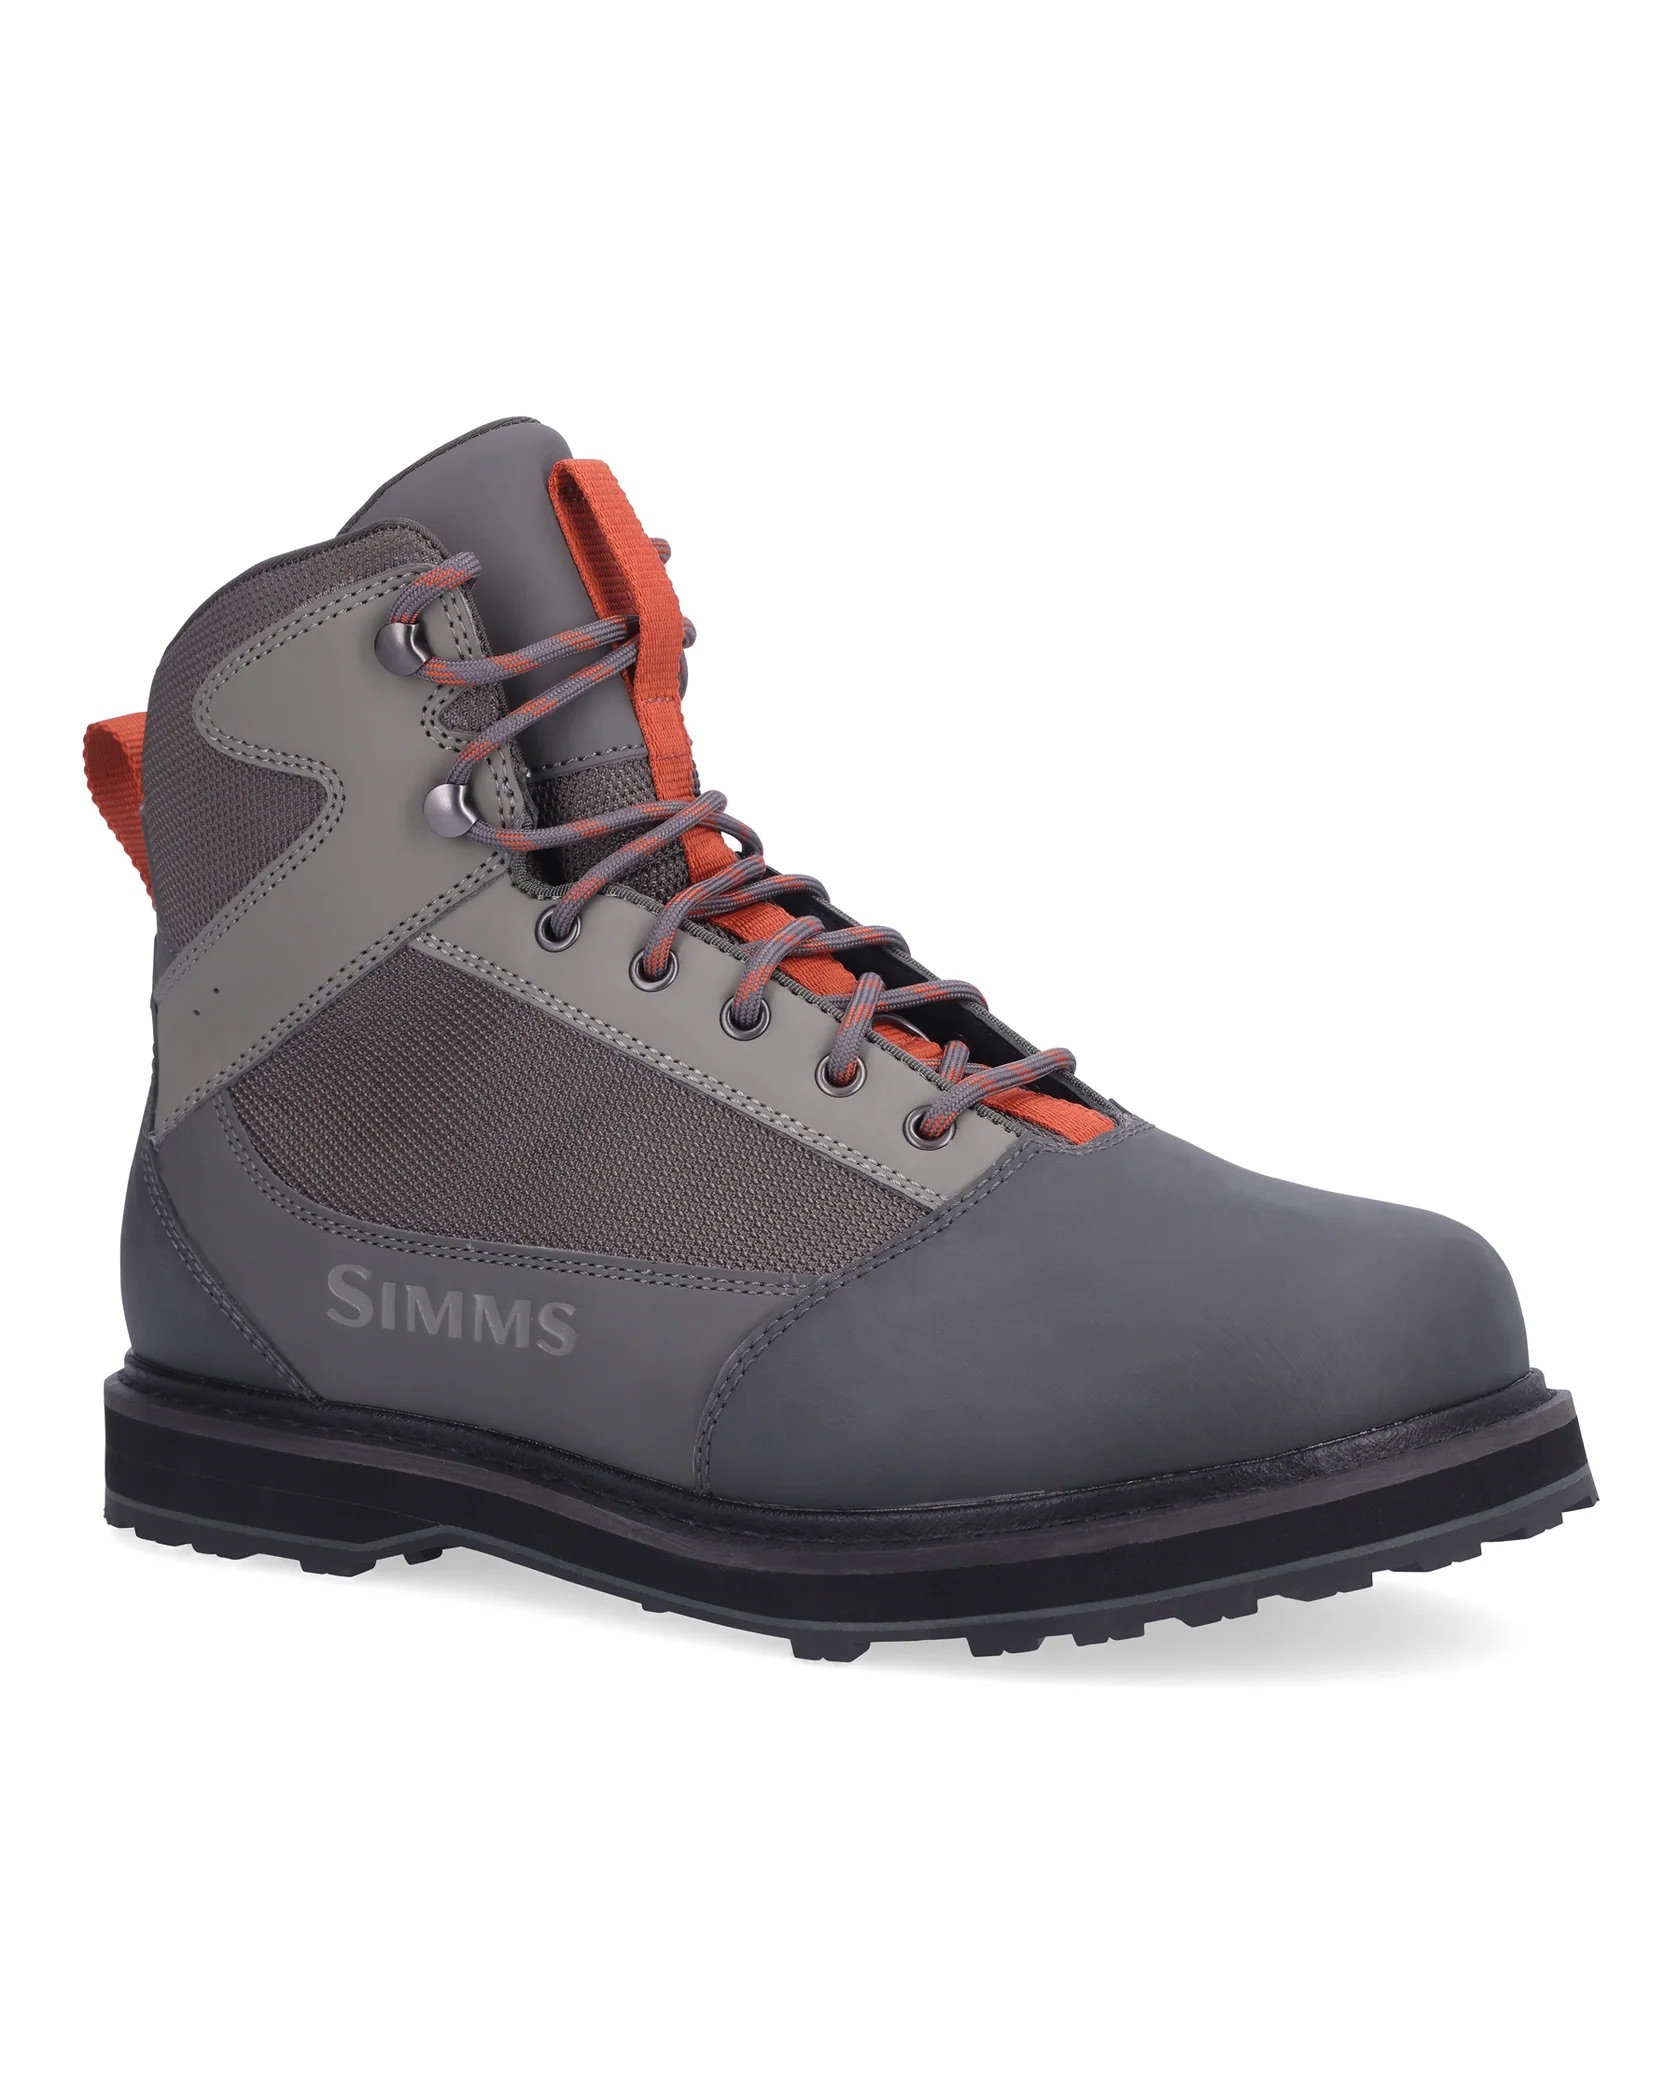 Simms Tributary Wading Boot - Rubber - Size 9